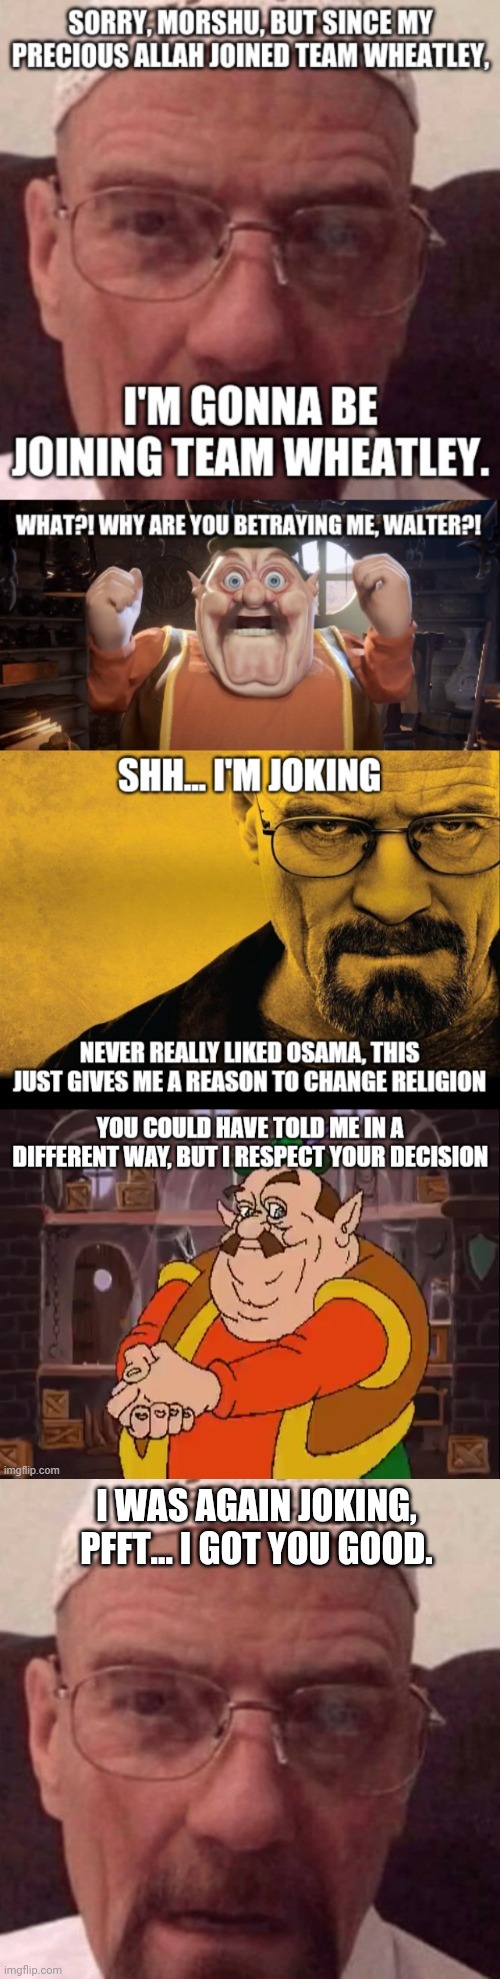 Walter White is a Muslim, no joke. | I WAS AGAIN JOKING, PFFT... I GOT YOU GOOD. | image tagged in walter white | made w/ Imgflip meme maker